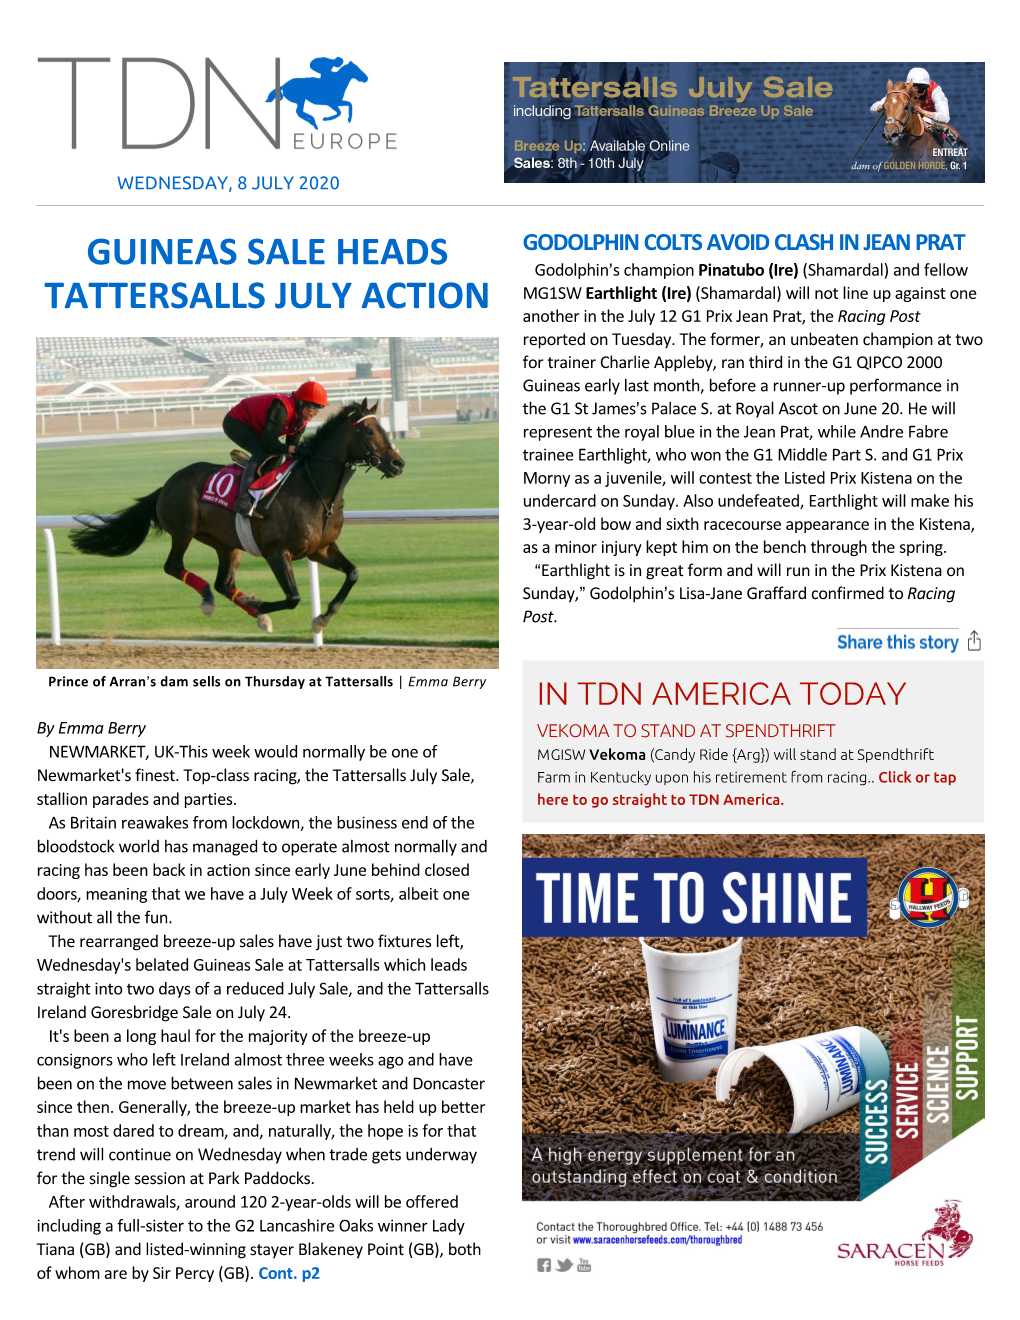 Guineas Sale Heads Tattersalls July Action